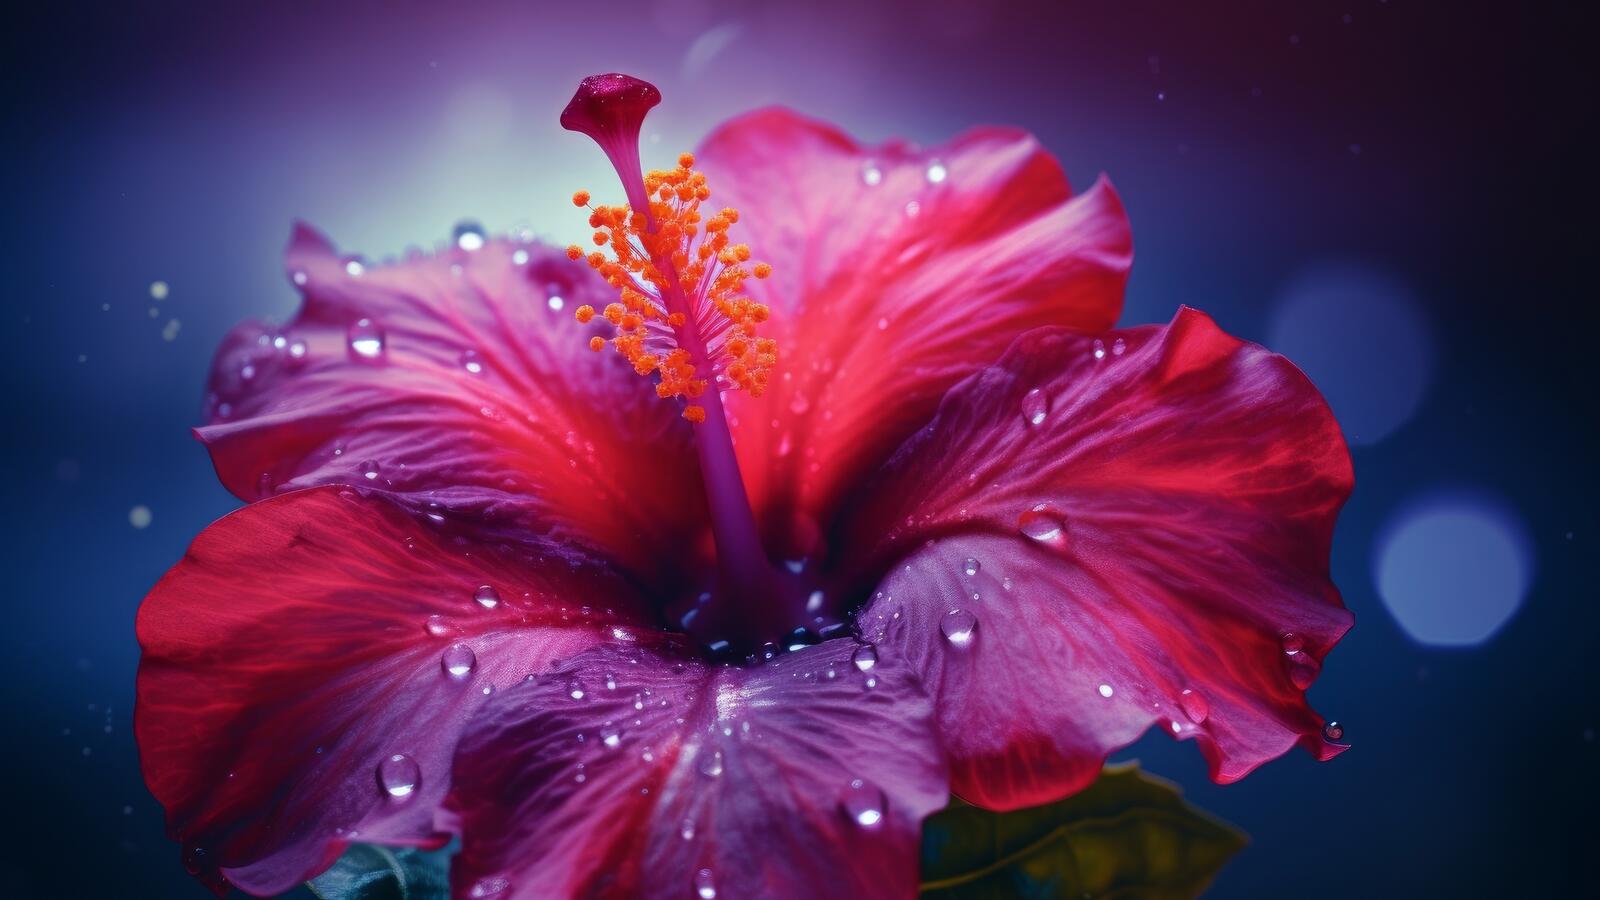 Free photo A beautiful red flower with raindrops on the petals